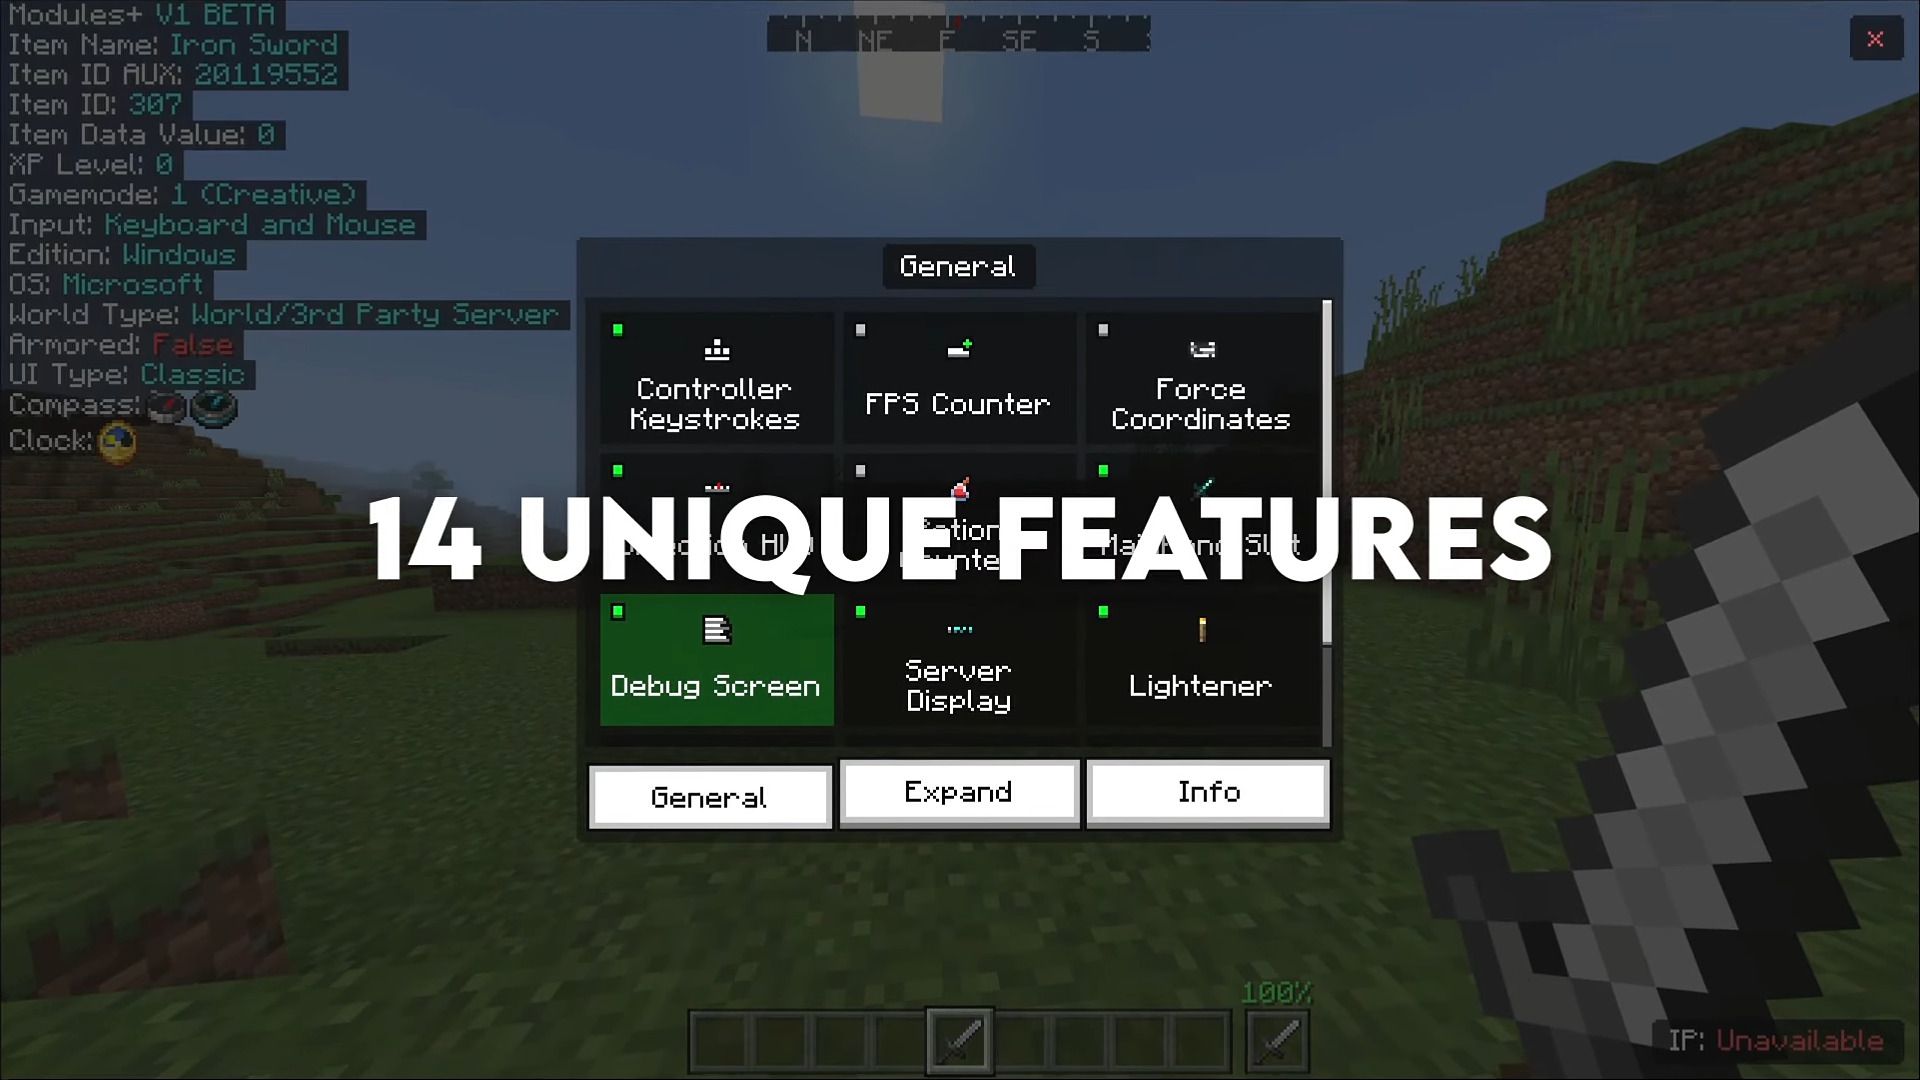 Modules+ Client (1.19) - Work on Any Server 3